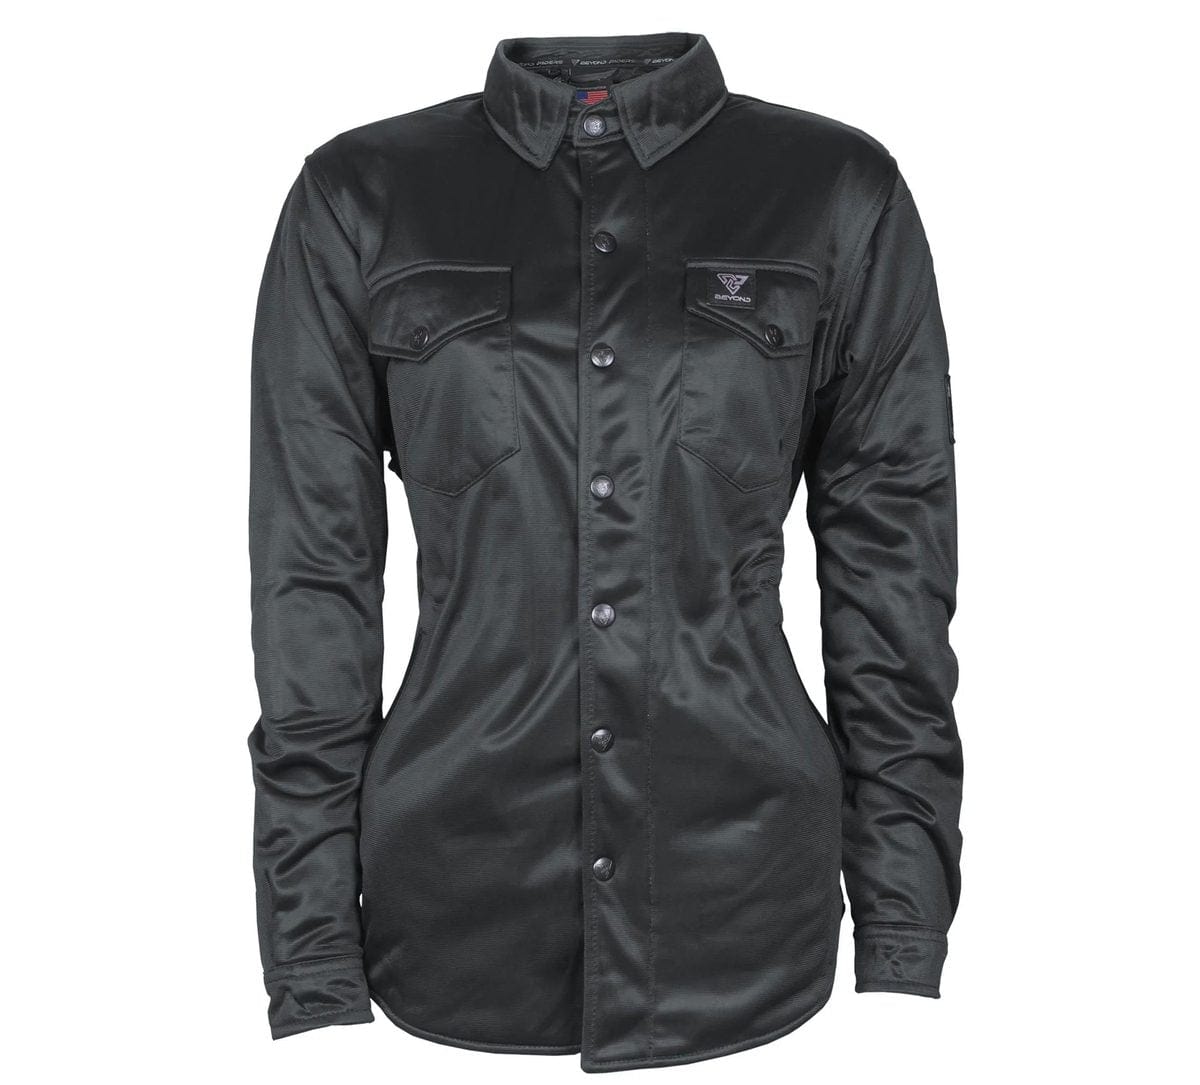 Ultra Protective Shirt for Women - Black Solid